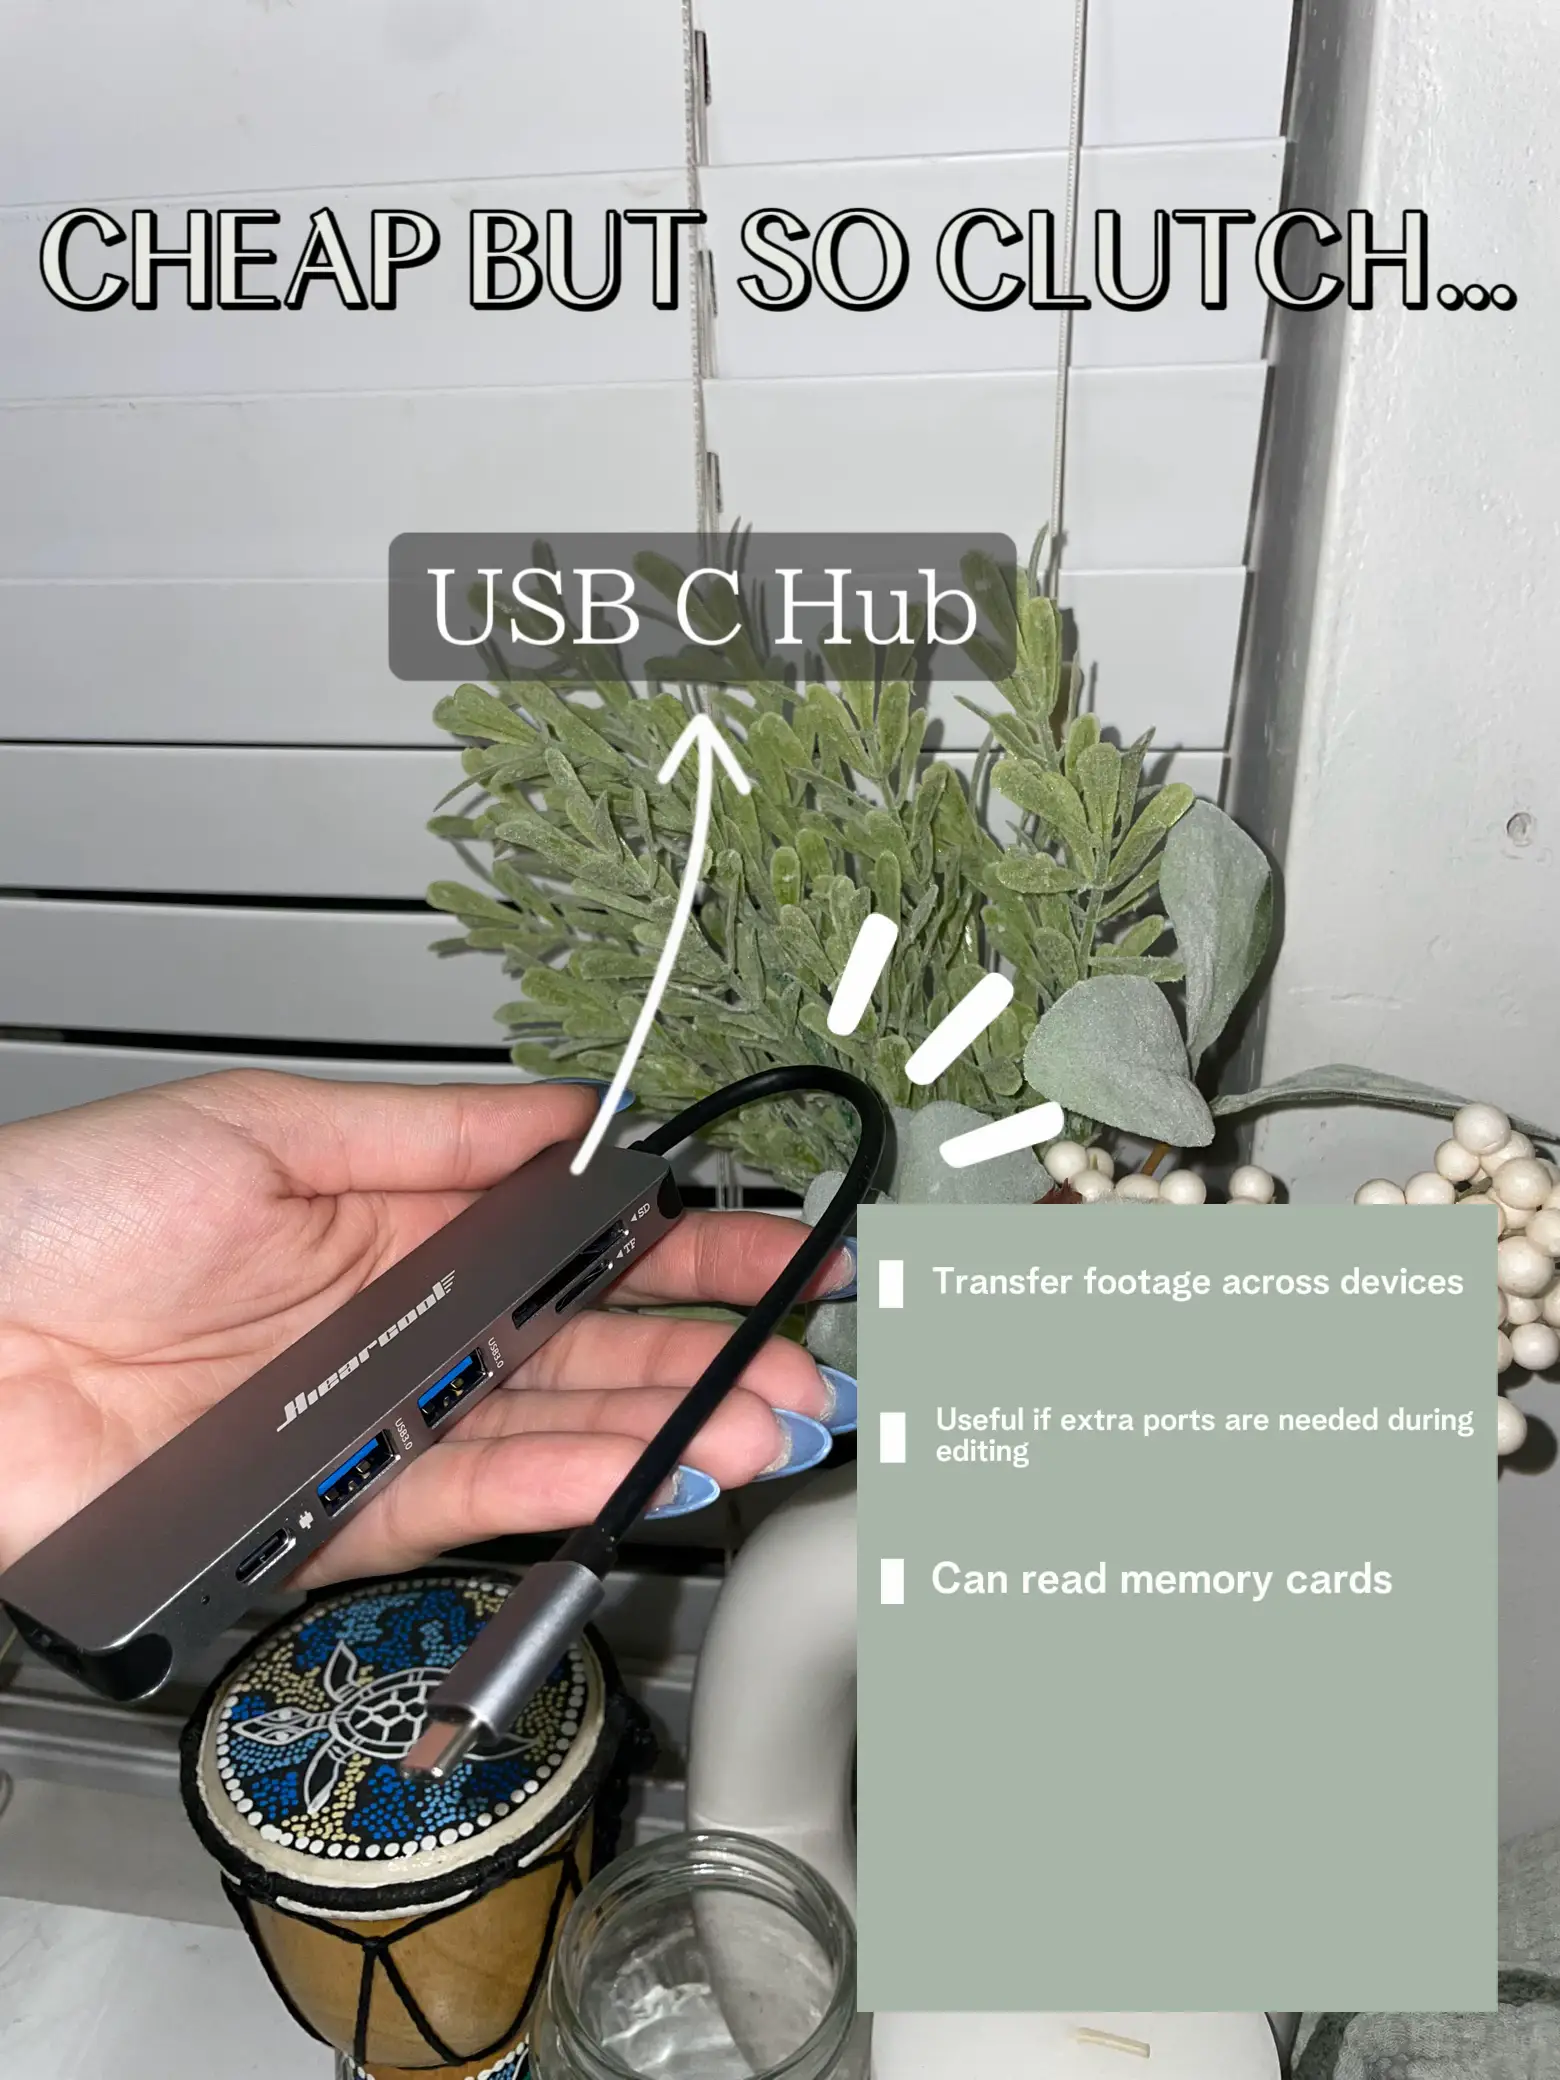  A hand holding a cell phone with a USB C Hub.